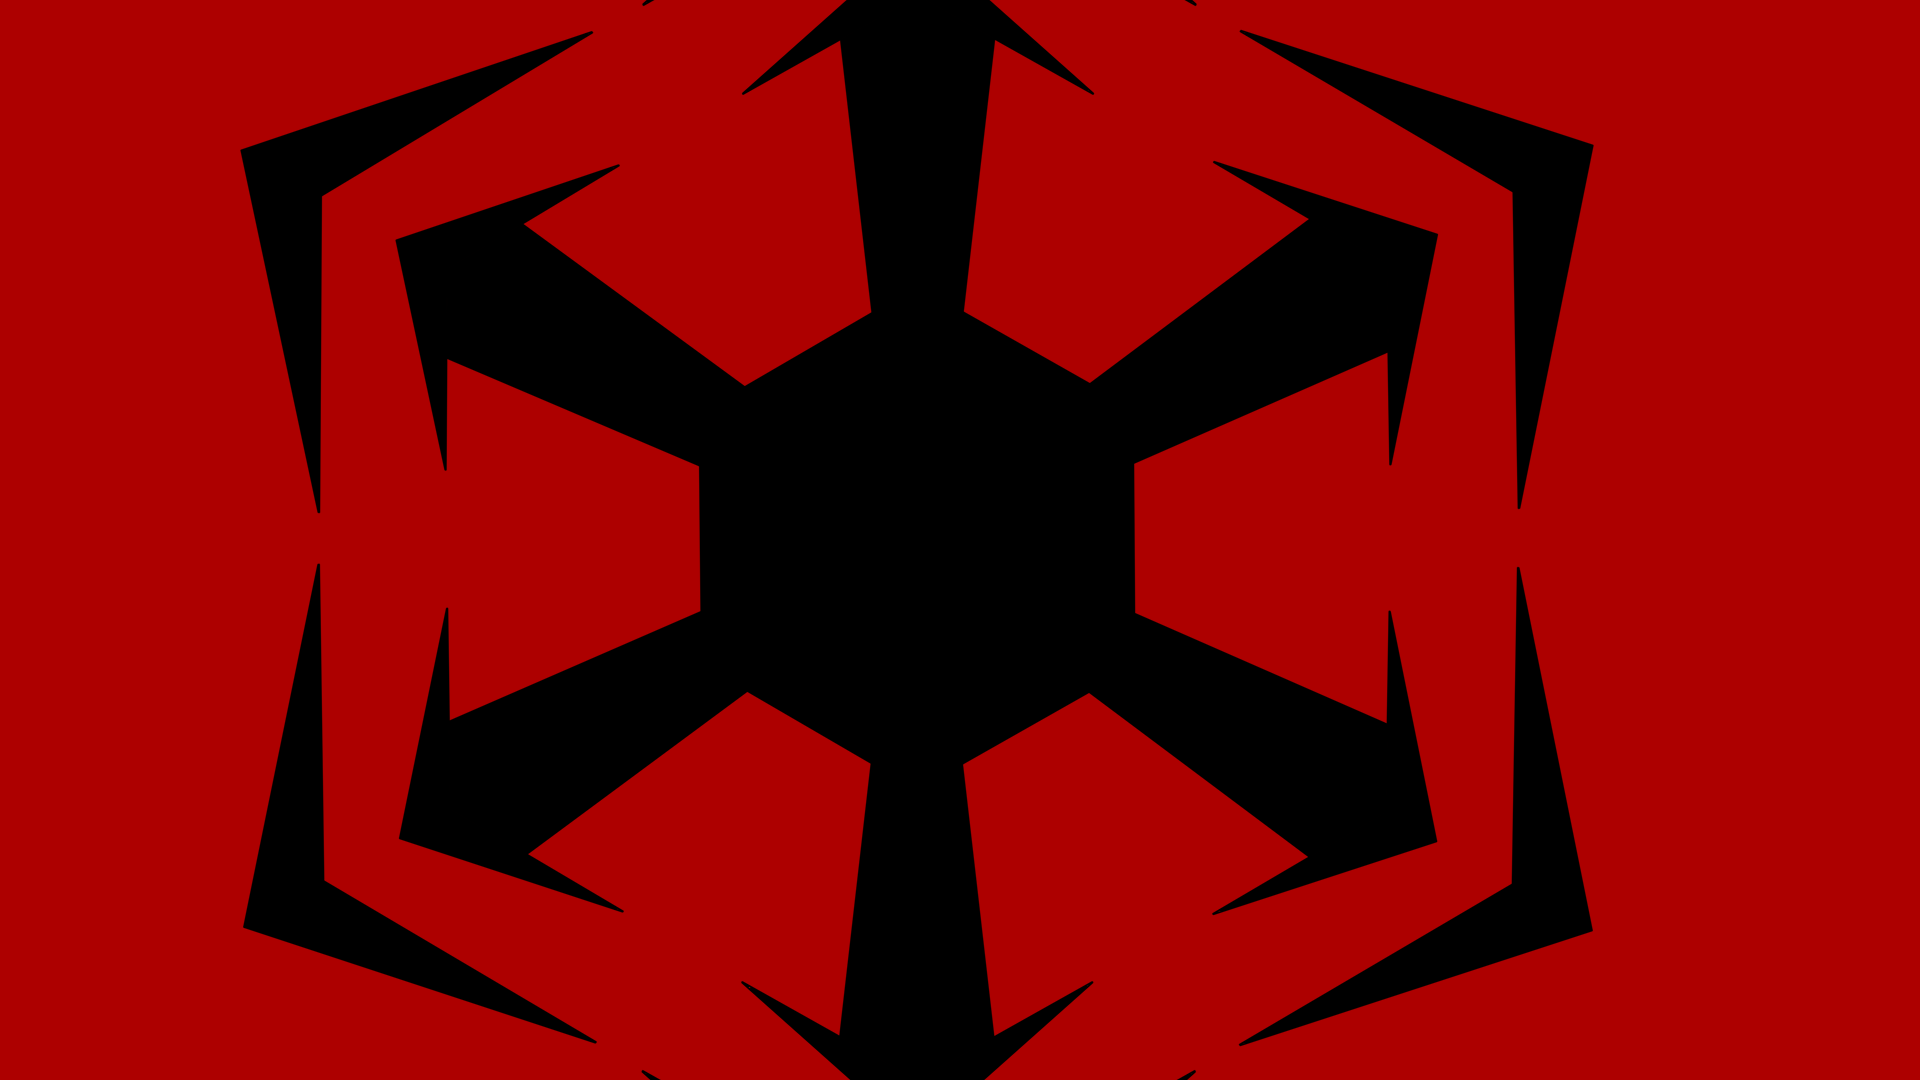 General 1920x1080 Sith Star Wars Star Wars: Knights of the Old Republic II: The Sith Lords Knights of the Old Republic video games PC gaming red background logo